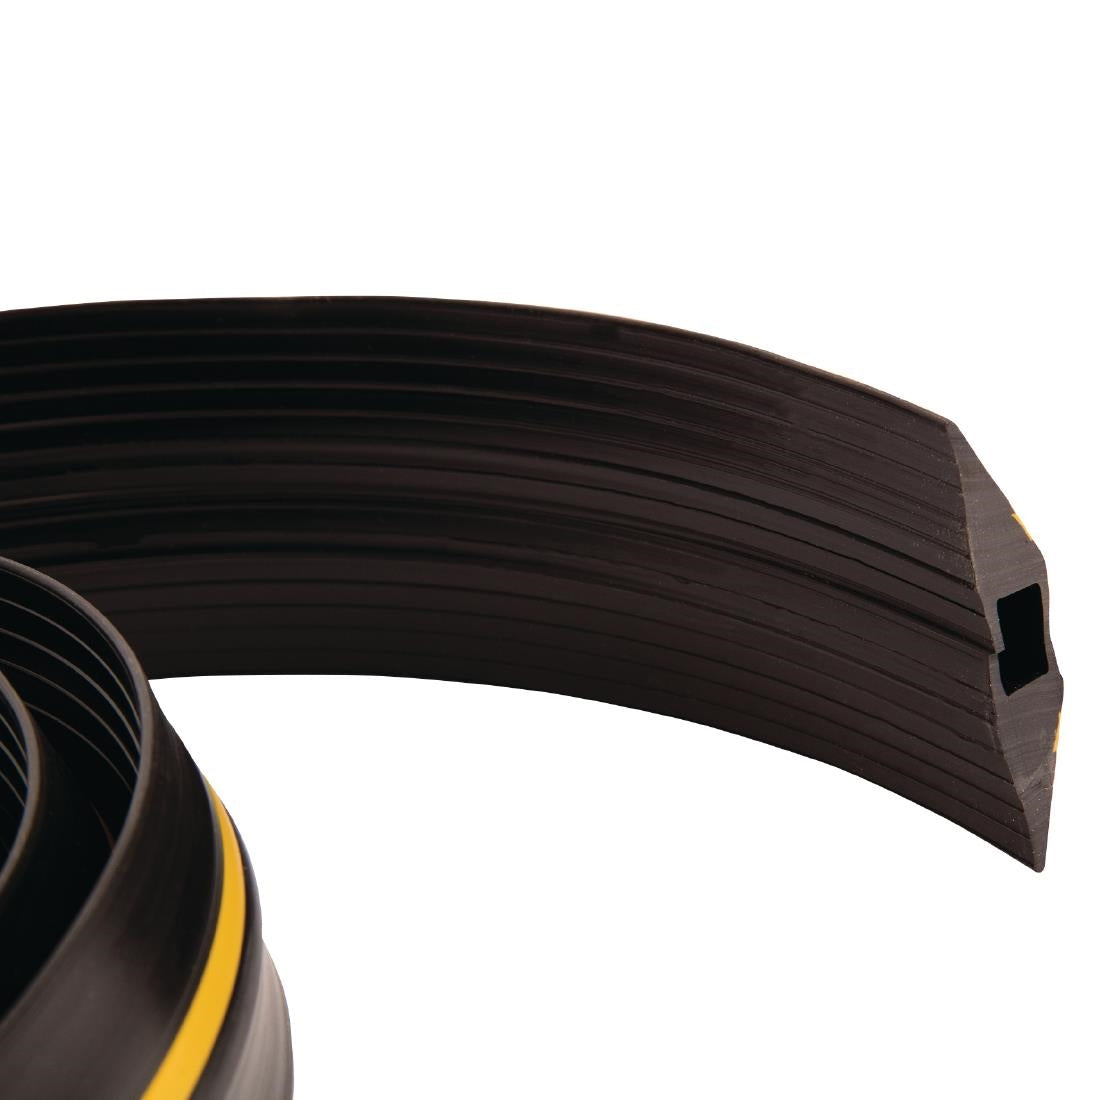 COBA CablePro GP Cable Protector Black and Yellow 3m JD Catering Equipment Solutions Ltd